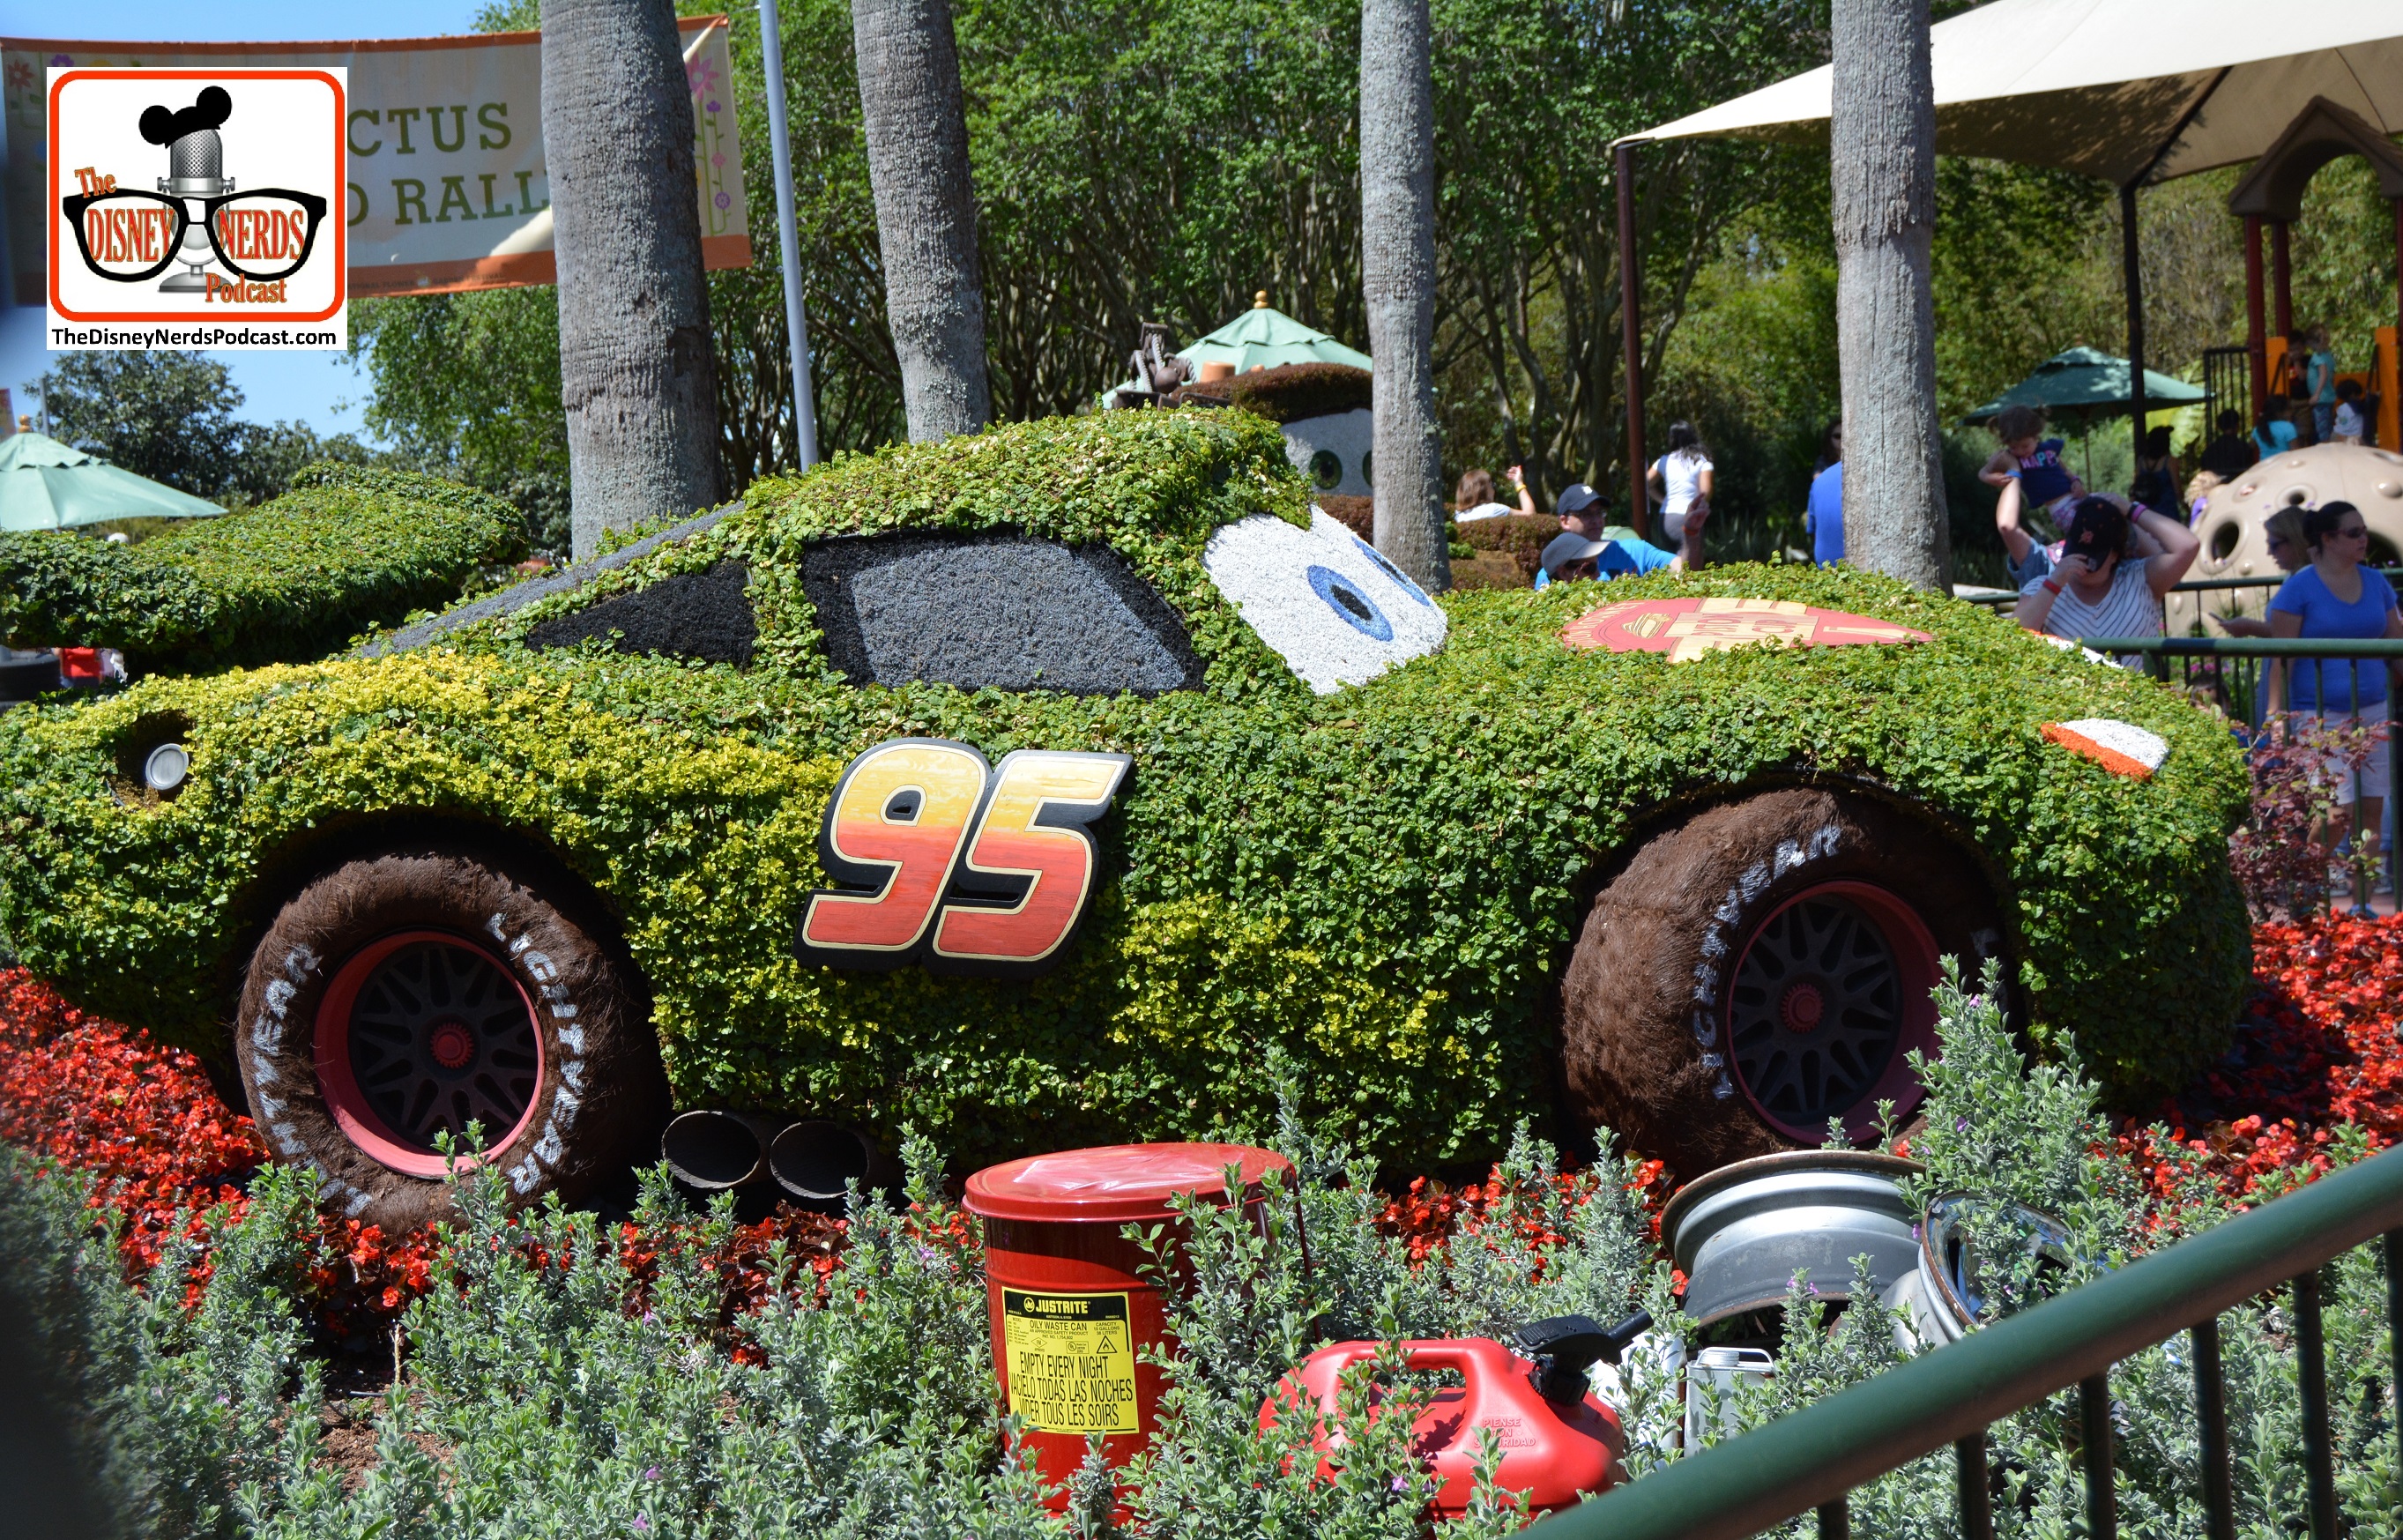 DNP April 2016 Photo Report: Epcot Flower and Garden Festival. Lightning McQueen on Cactus Road Rally Play Area